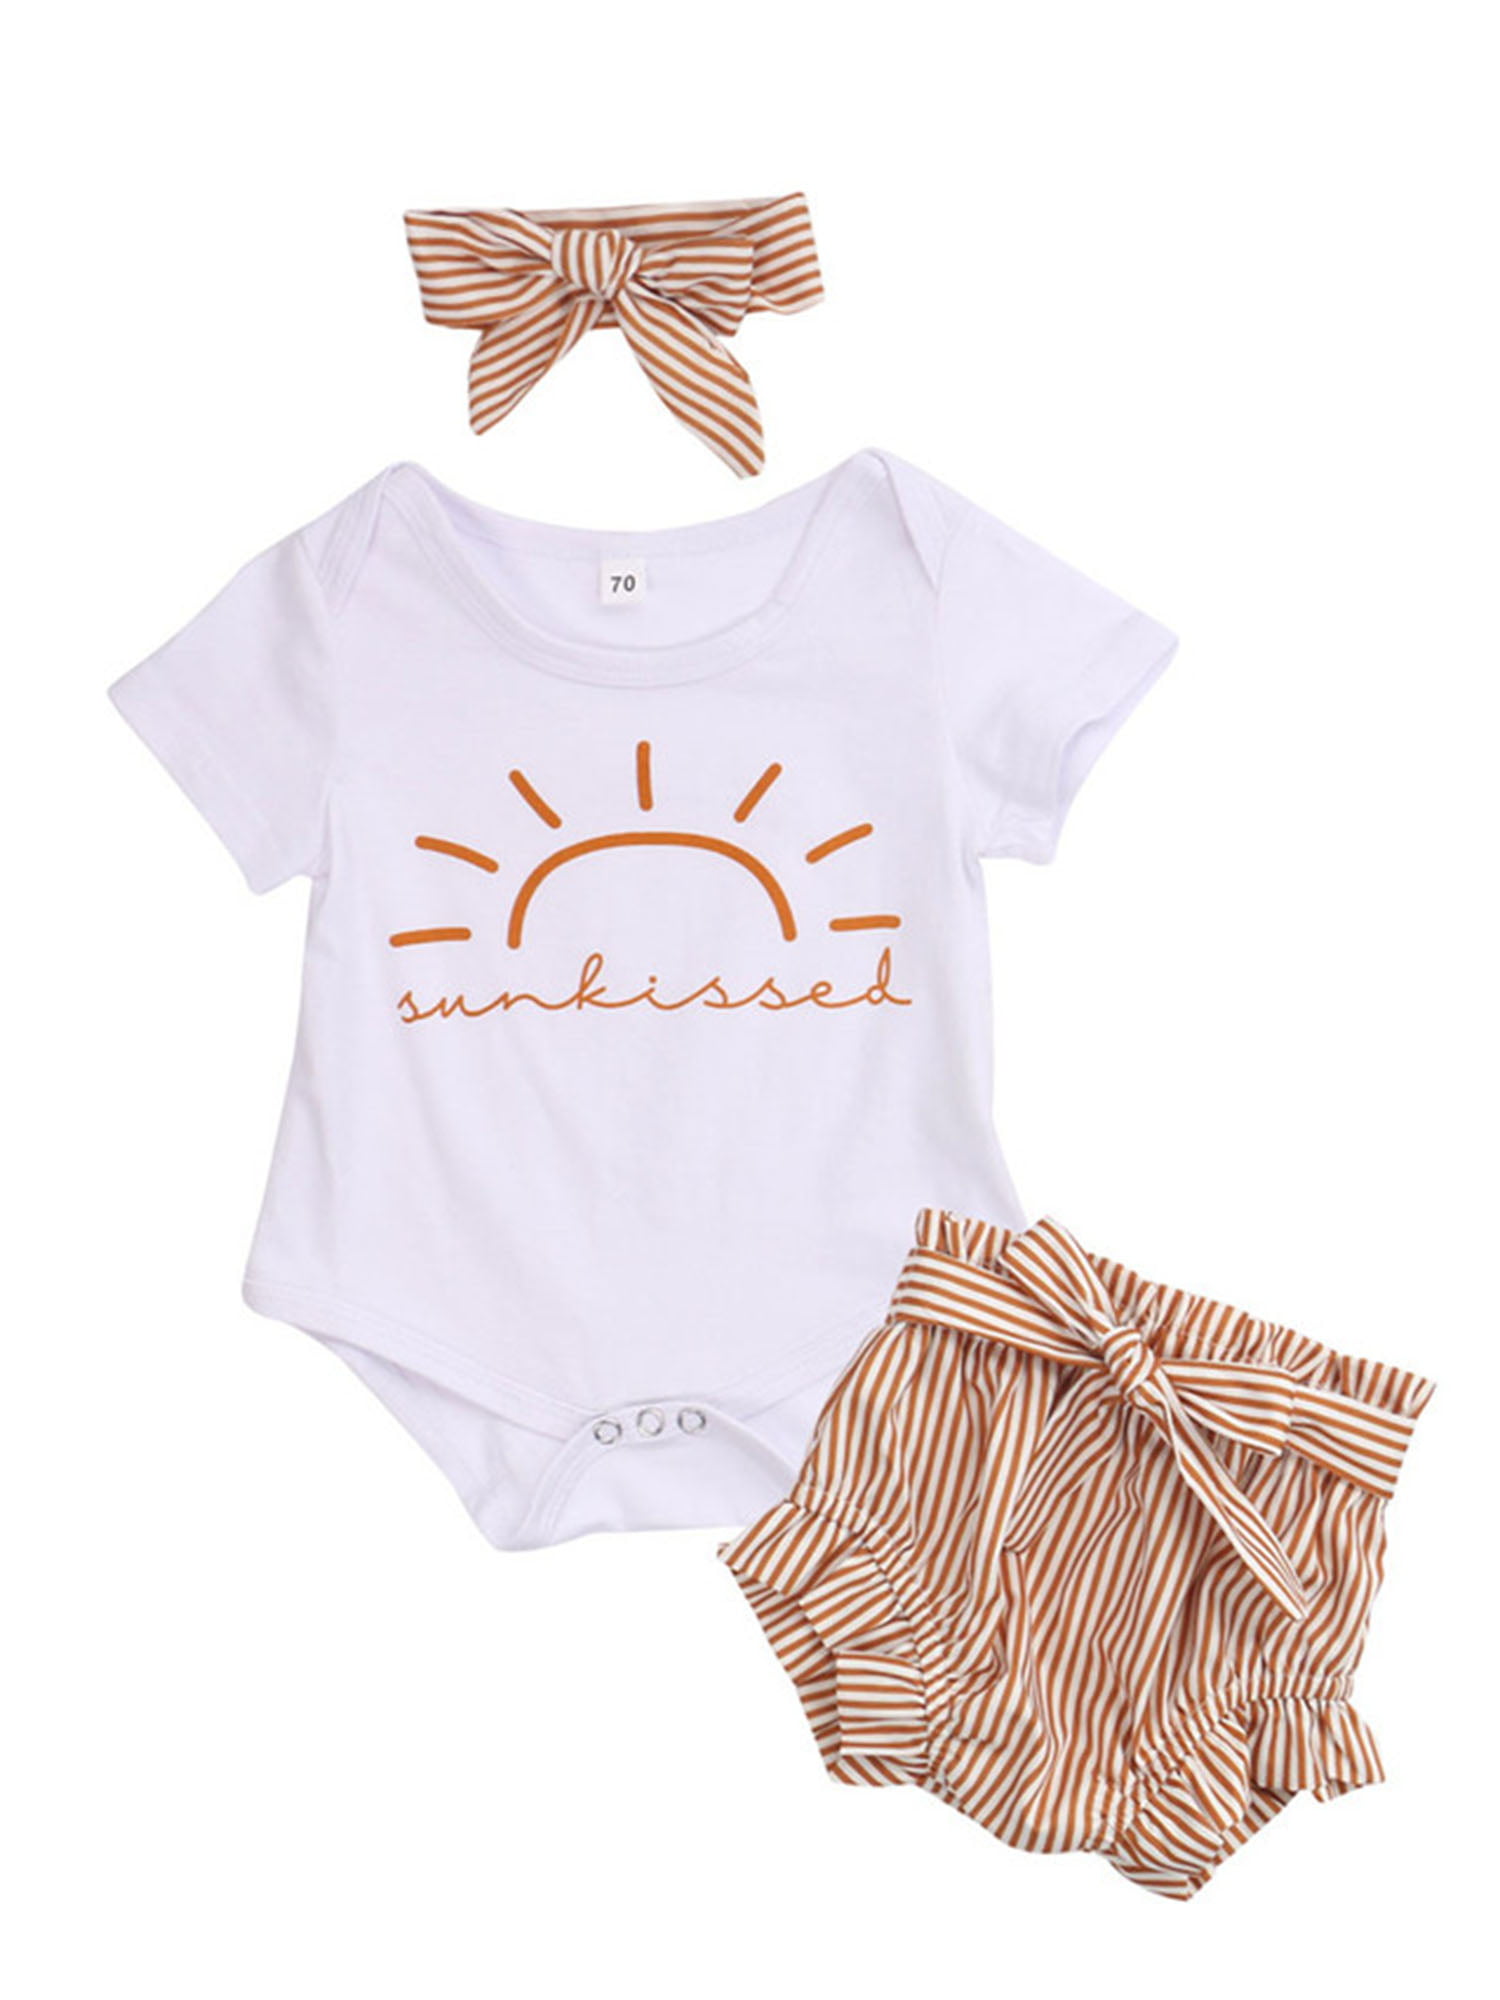 BABY GIRL'S 2PC SUMMER ROMPER SET/OUTFIT 1 3 6 9 12 18 23MTHS 